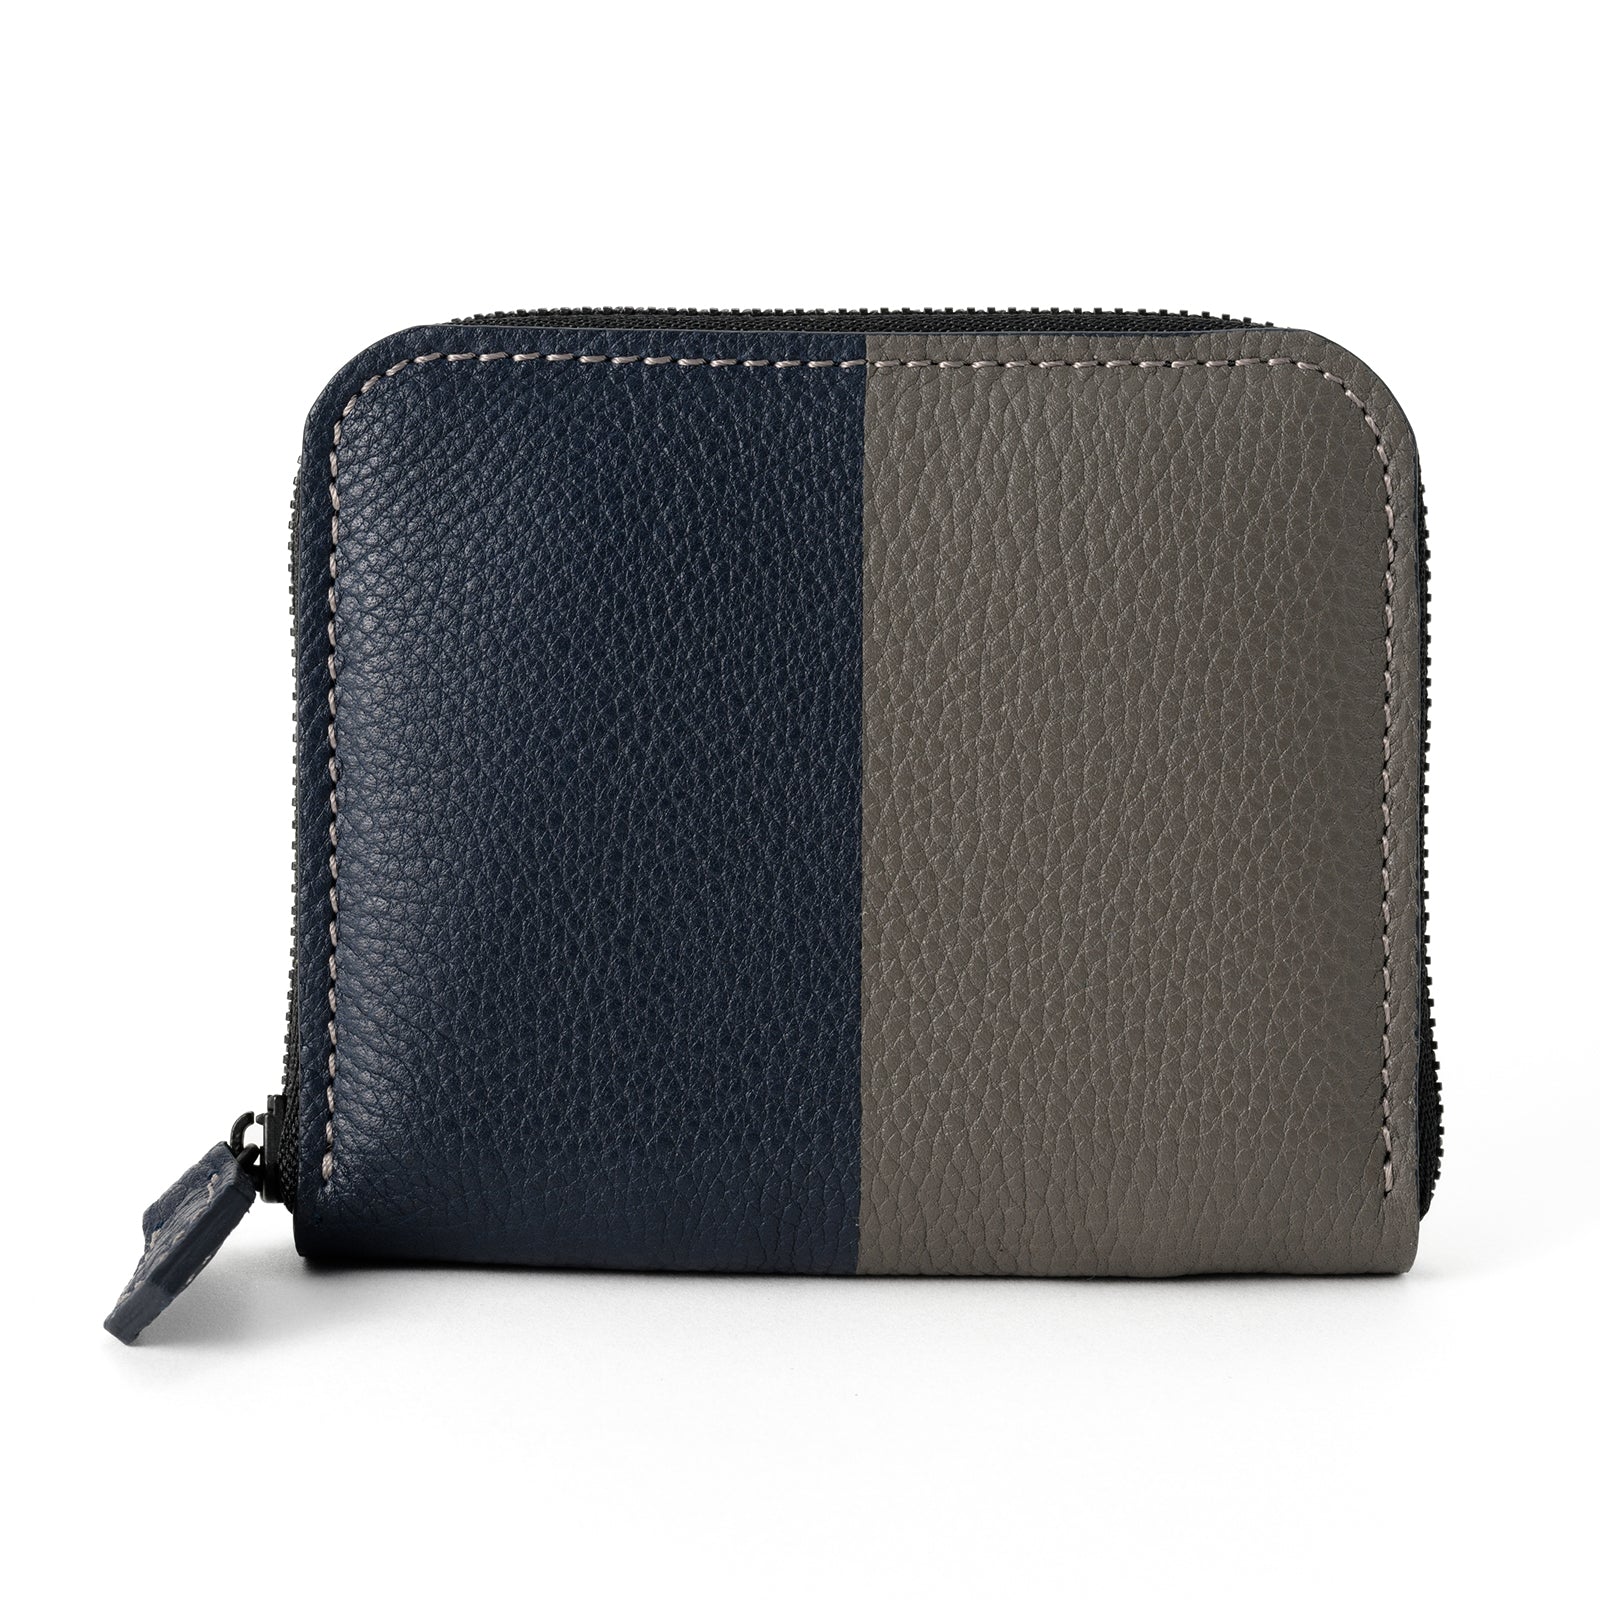 Bicolor round zipper compact wallet Togo leather